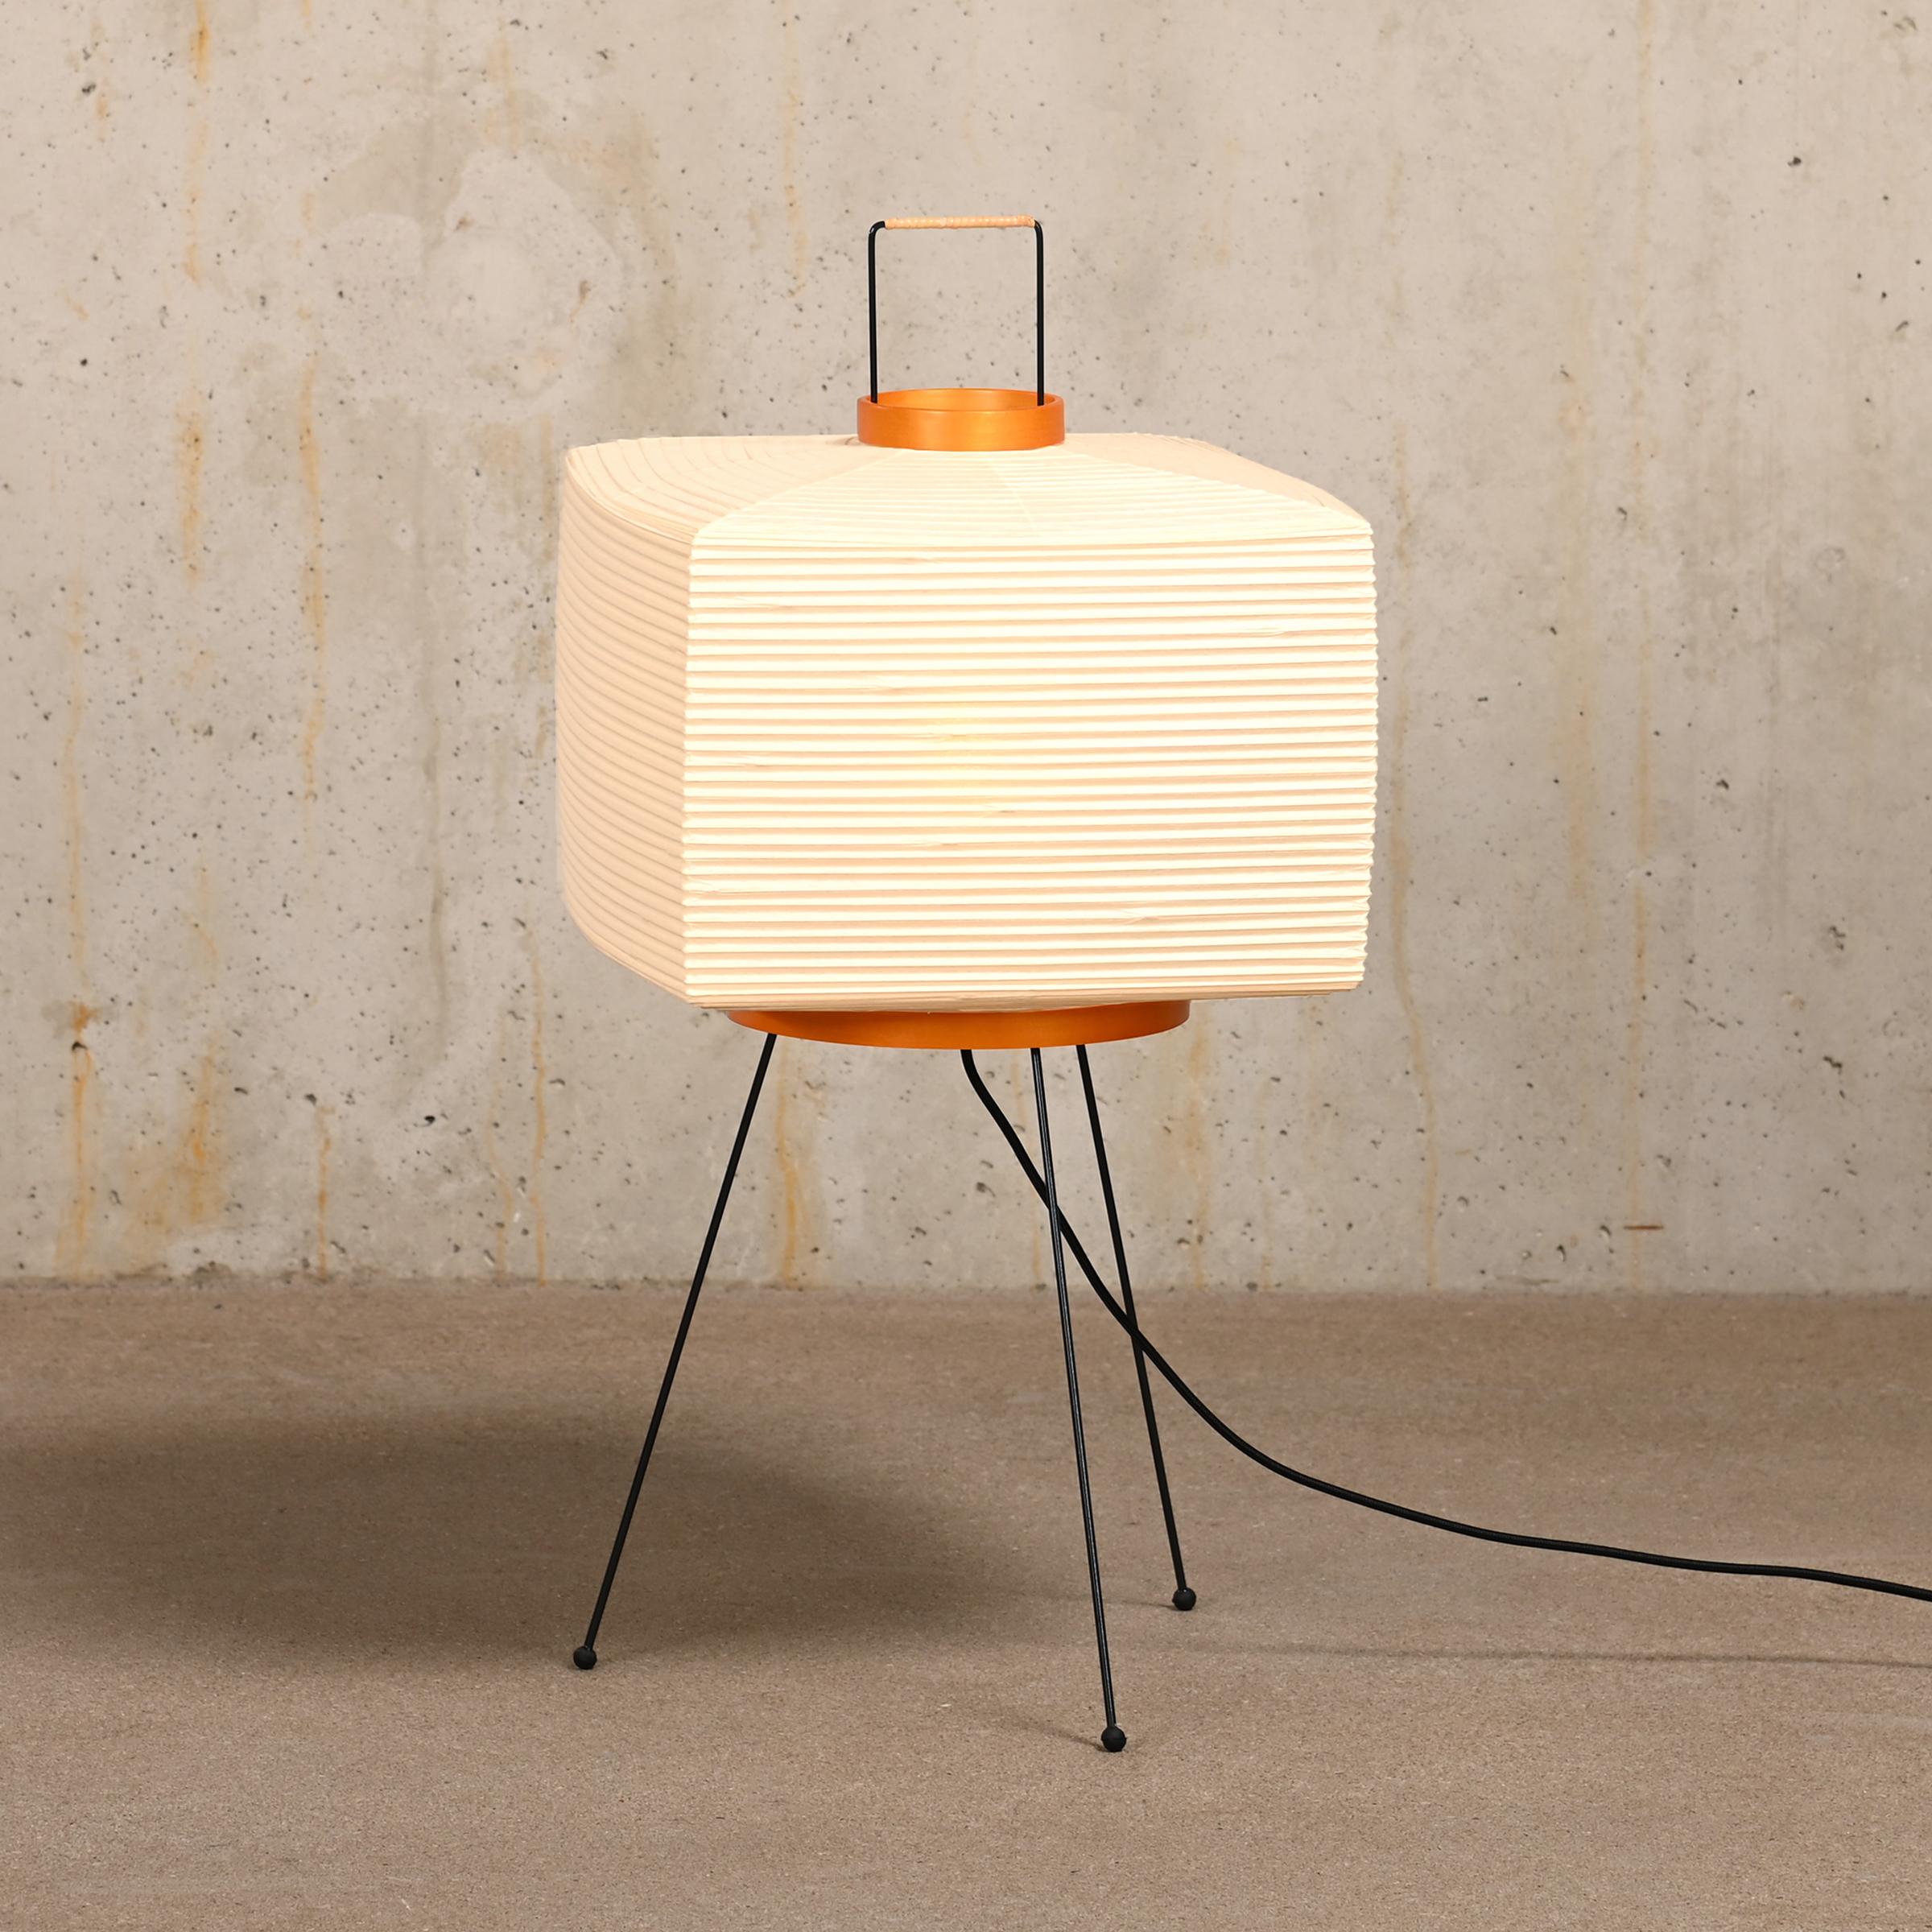 Iconic Akari light sculpture known as Model 7A designed by Isamu Noguchi and handcrafted from traditional washi paper and bamboo. Each Akari lamp shade is meticulously crafted by hand in the Ozeki workshop, a traditional family-owned company, based